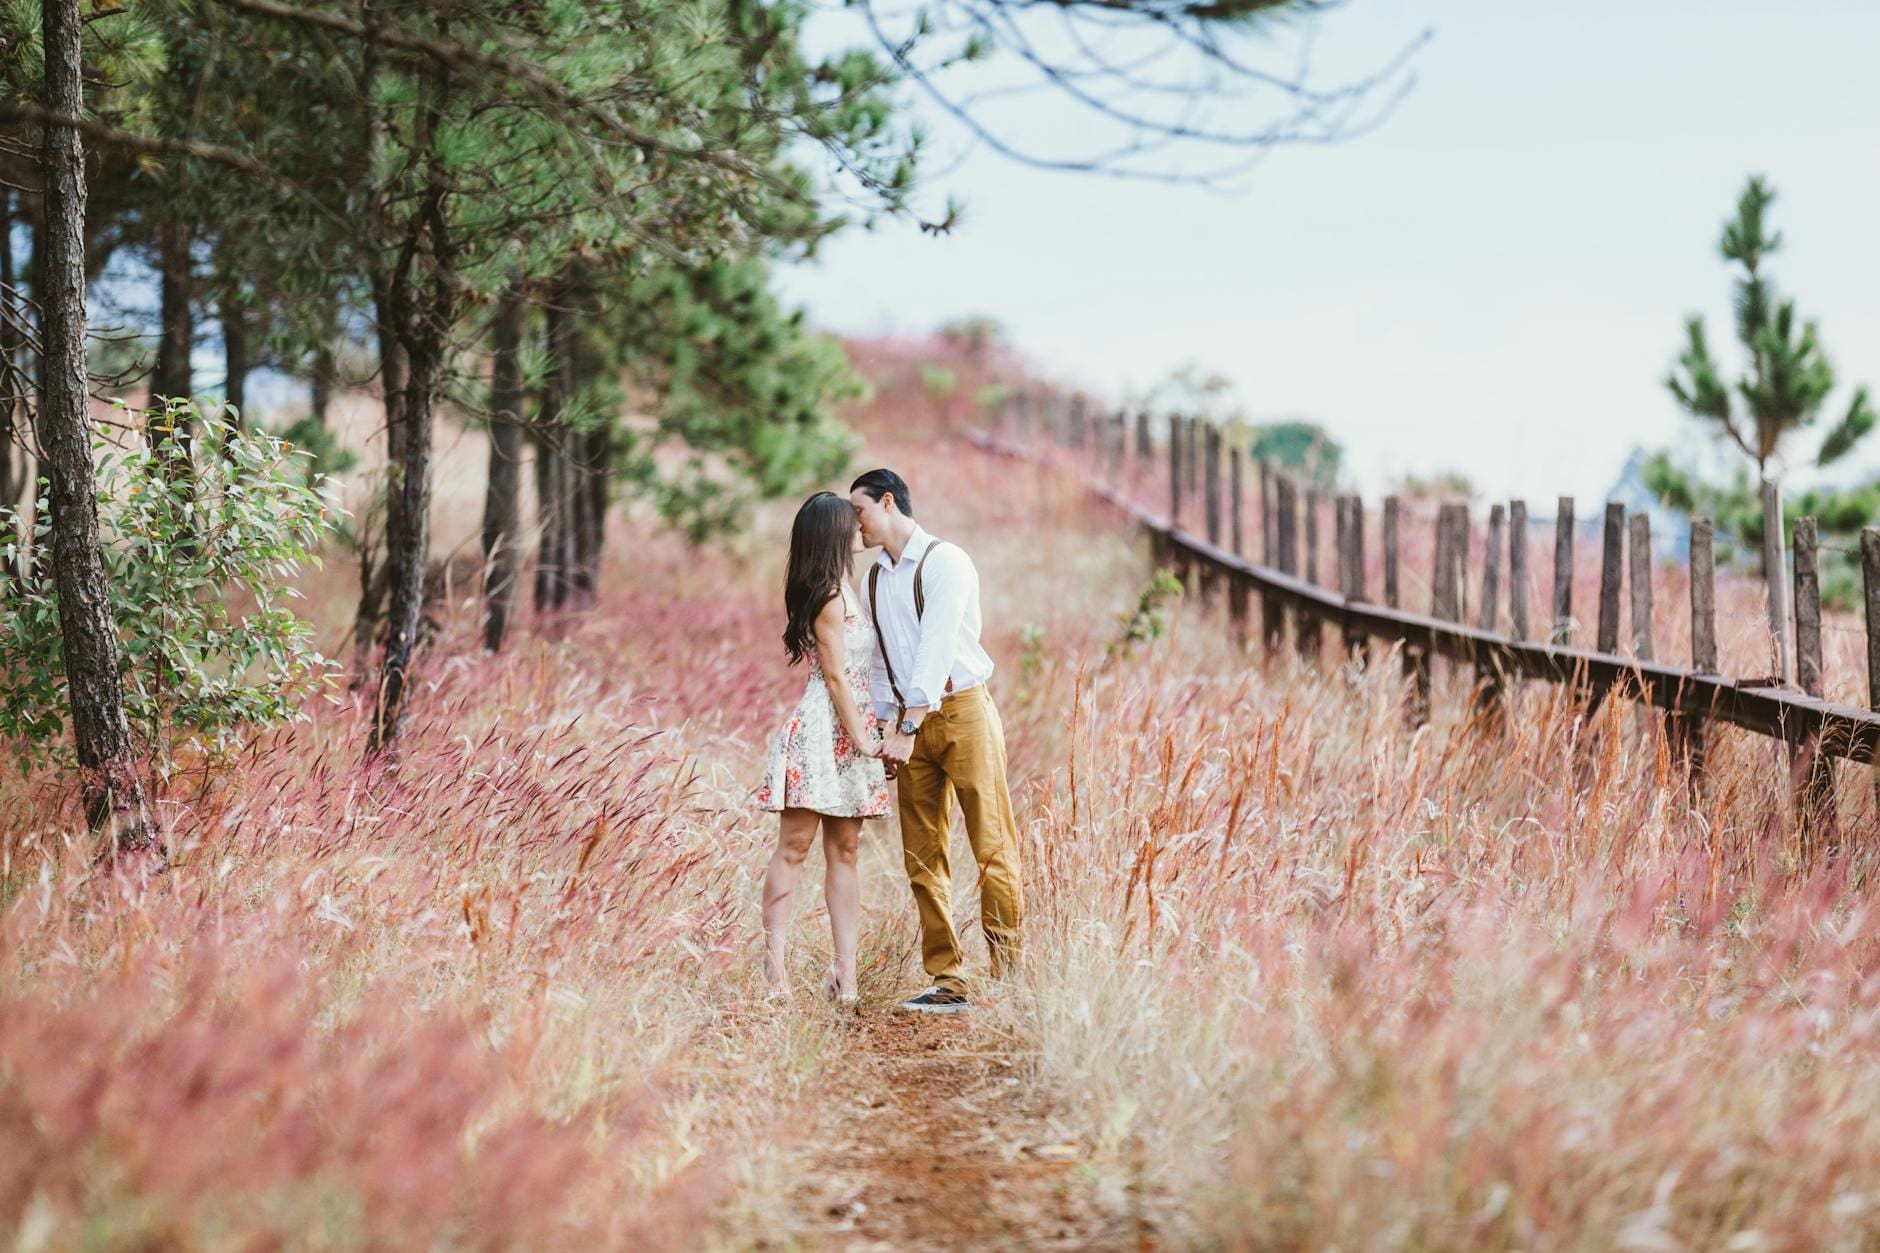 Snapping Love: Why Professional Engagement Photos Are Worth the Investment